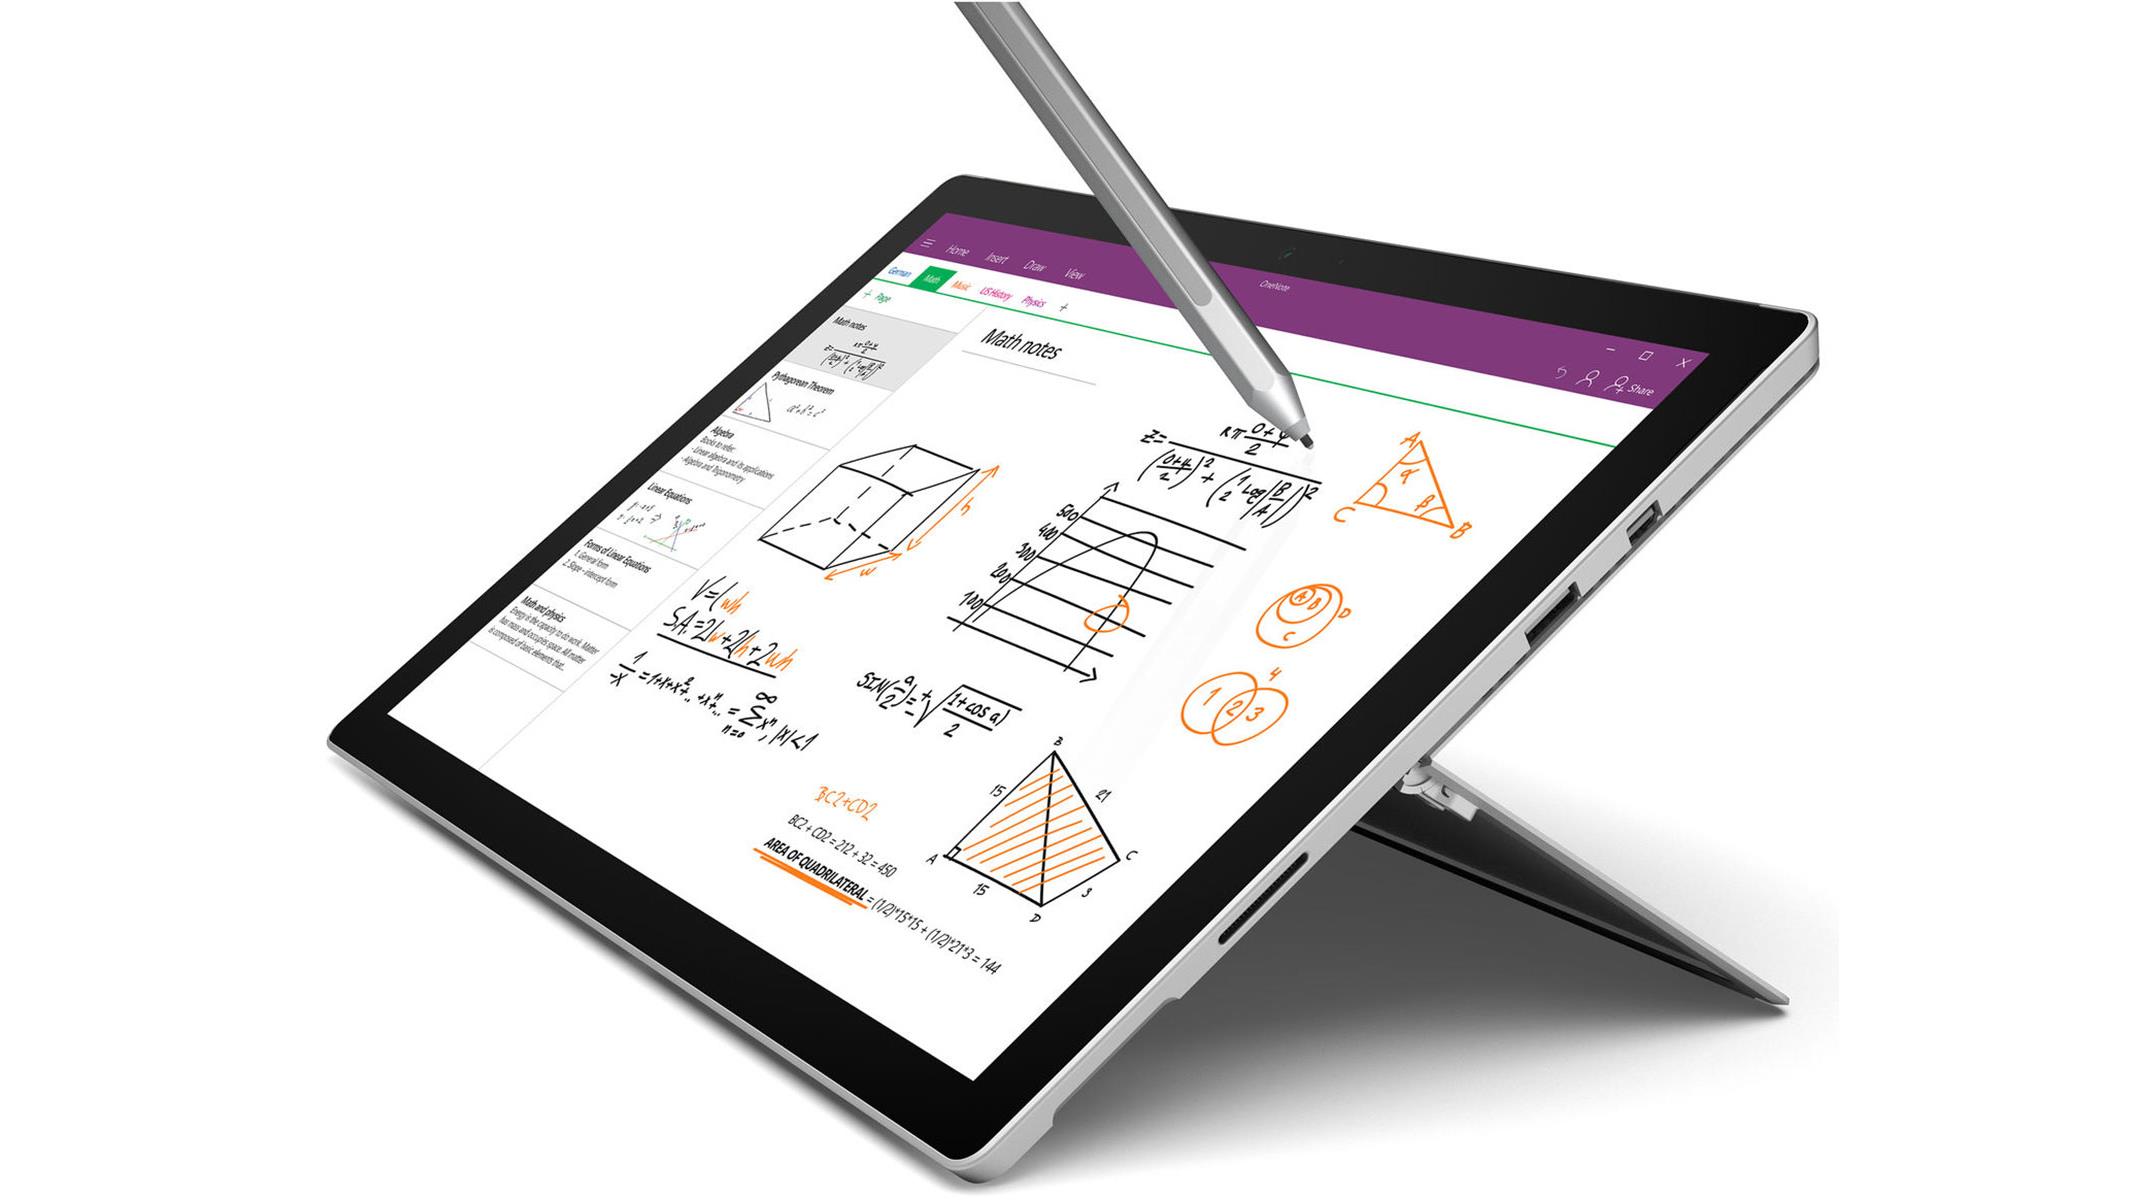 Microsoft Surface Pro 4 12.3 4GB/128GB Intel Core m3 Tablet with PixelSense  Display